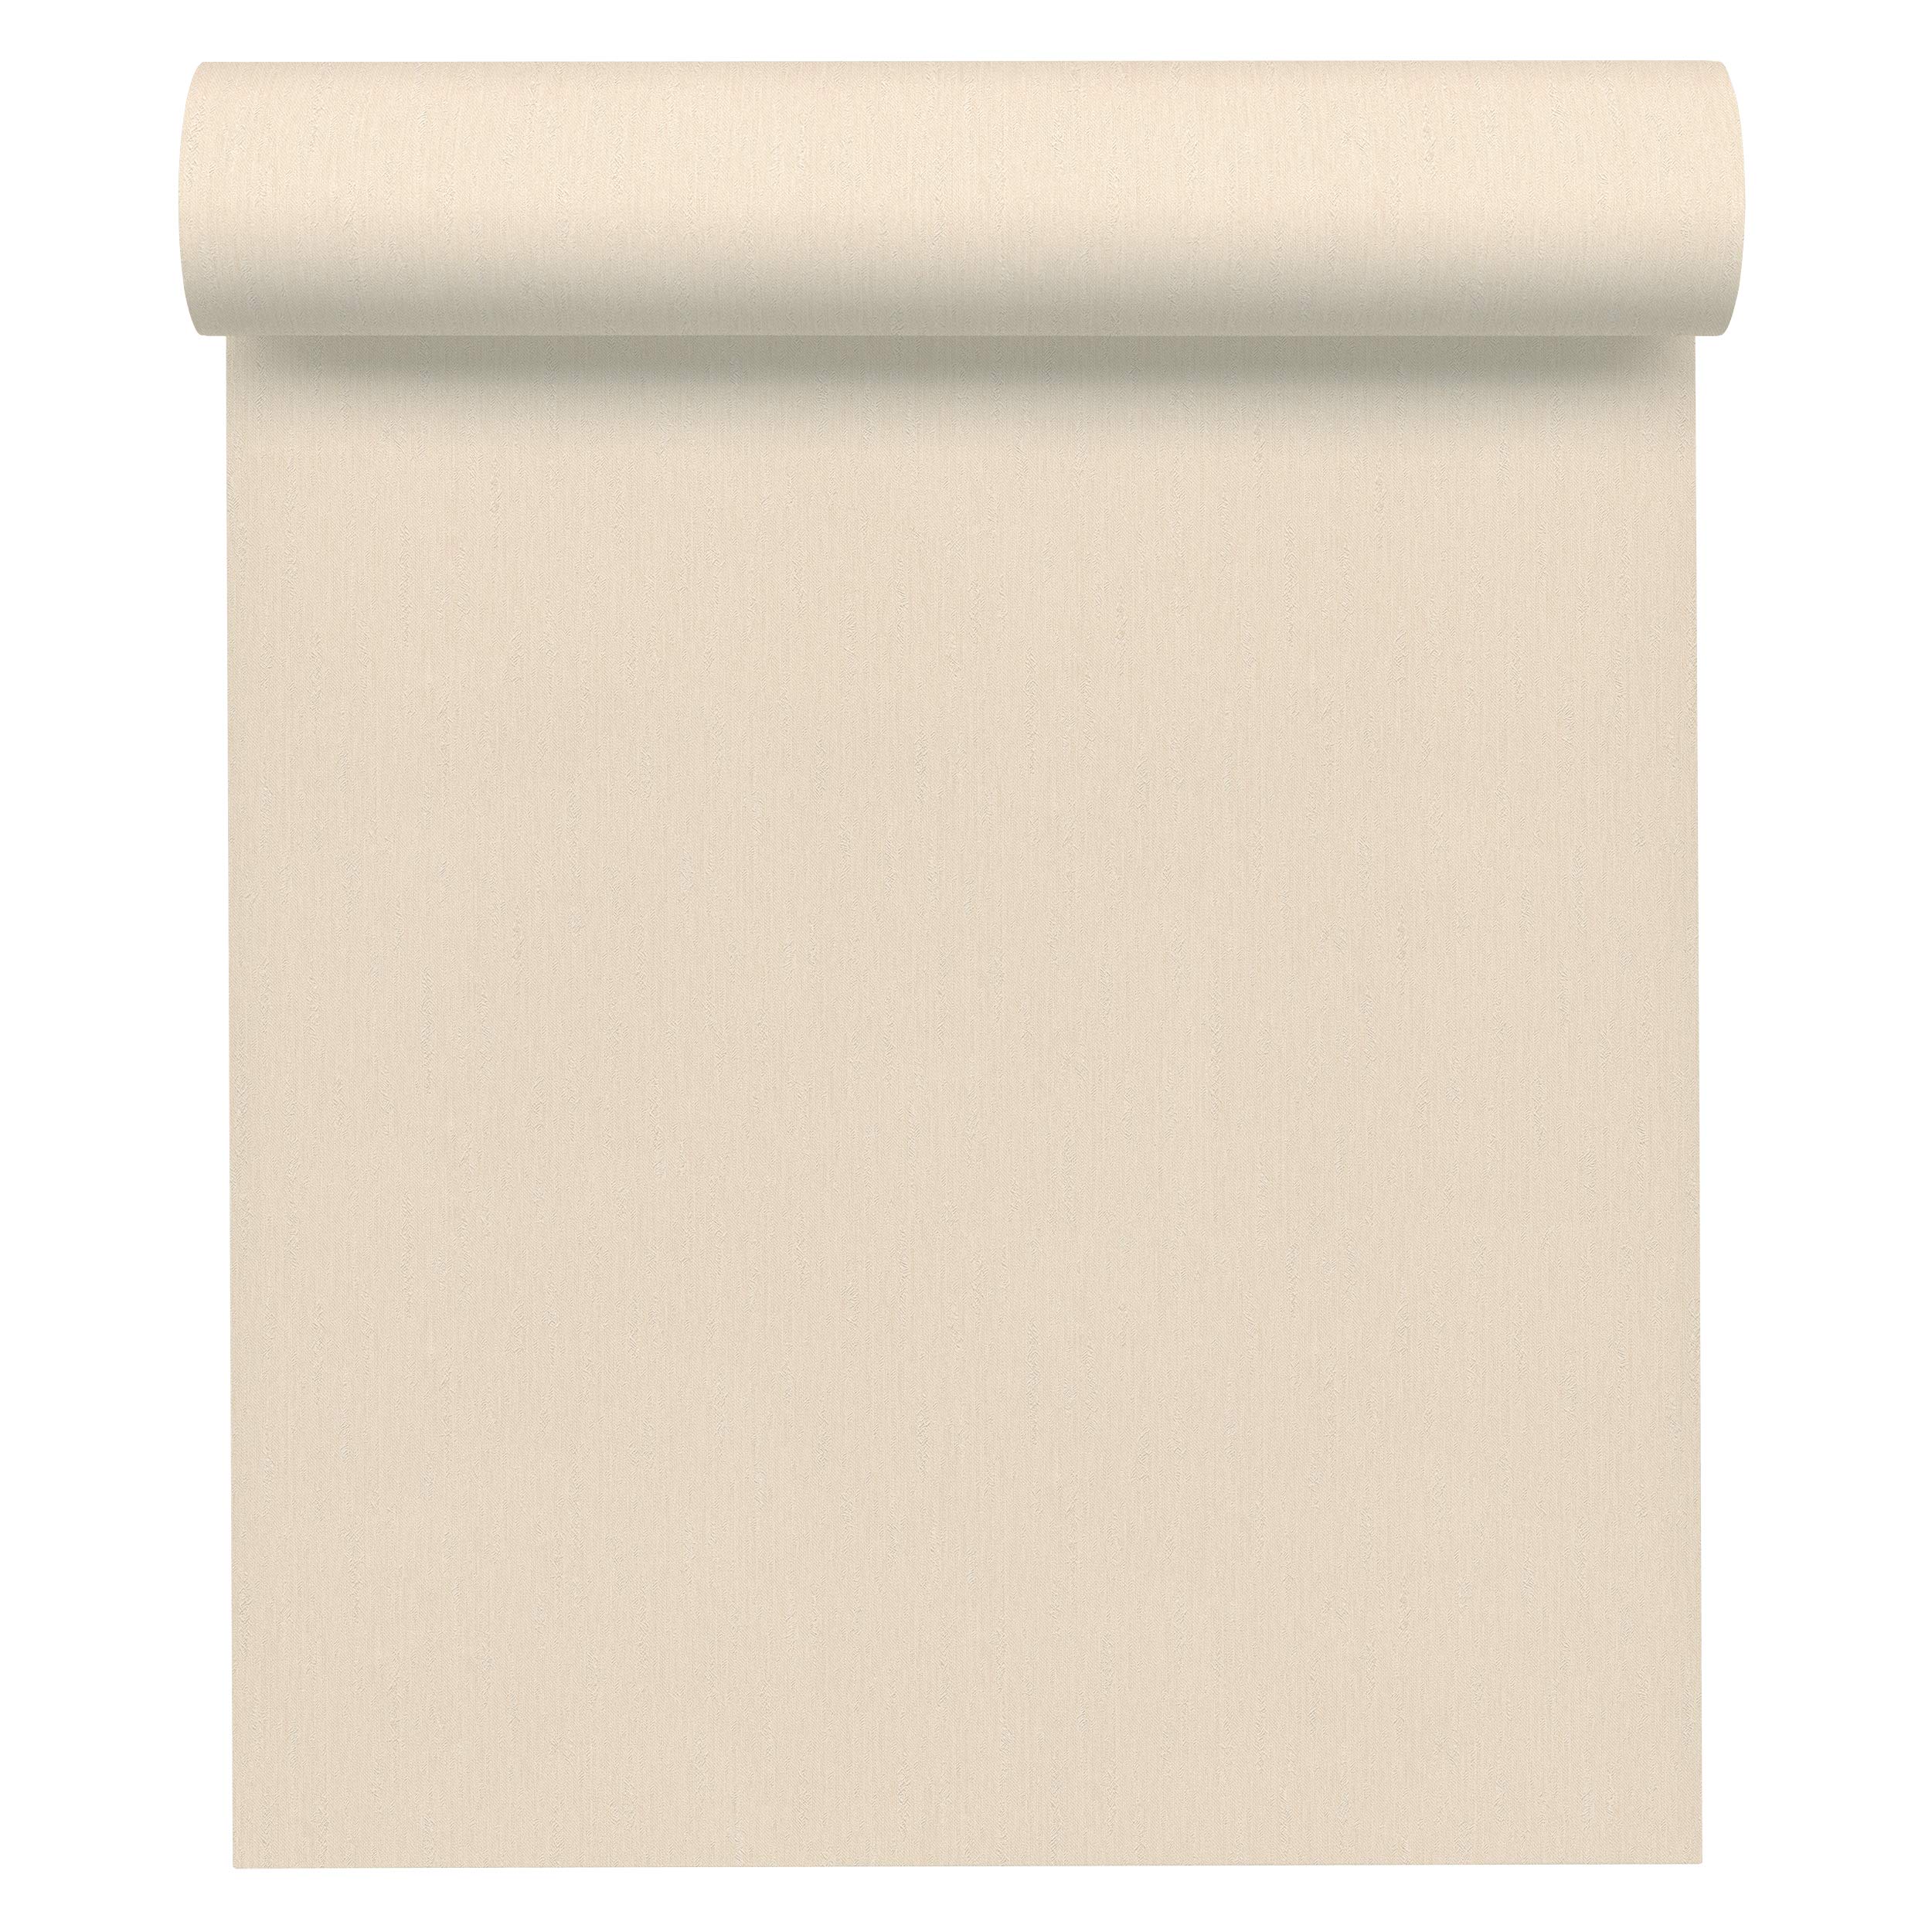 A.S. Création Vliestapete Chateau 5 Tapete Uni 10,05 m x 0,53 m creme metallic Made in Germany 345072 34507-2